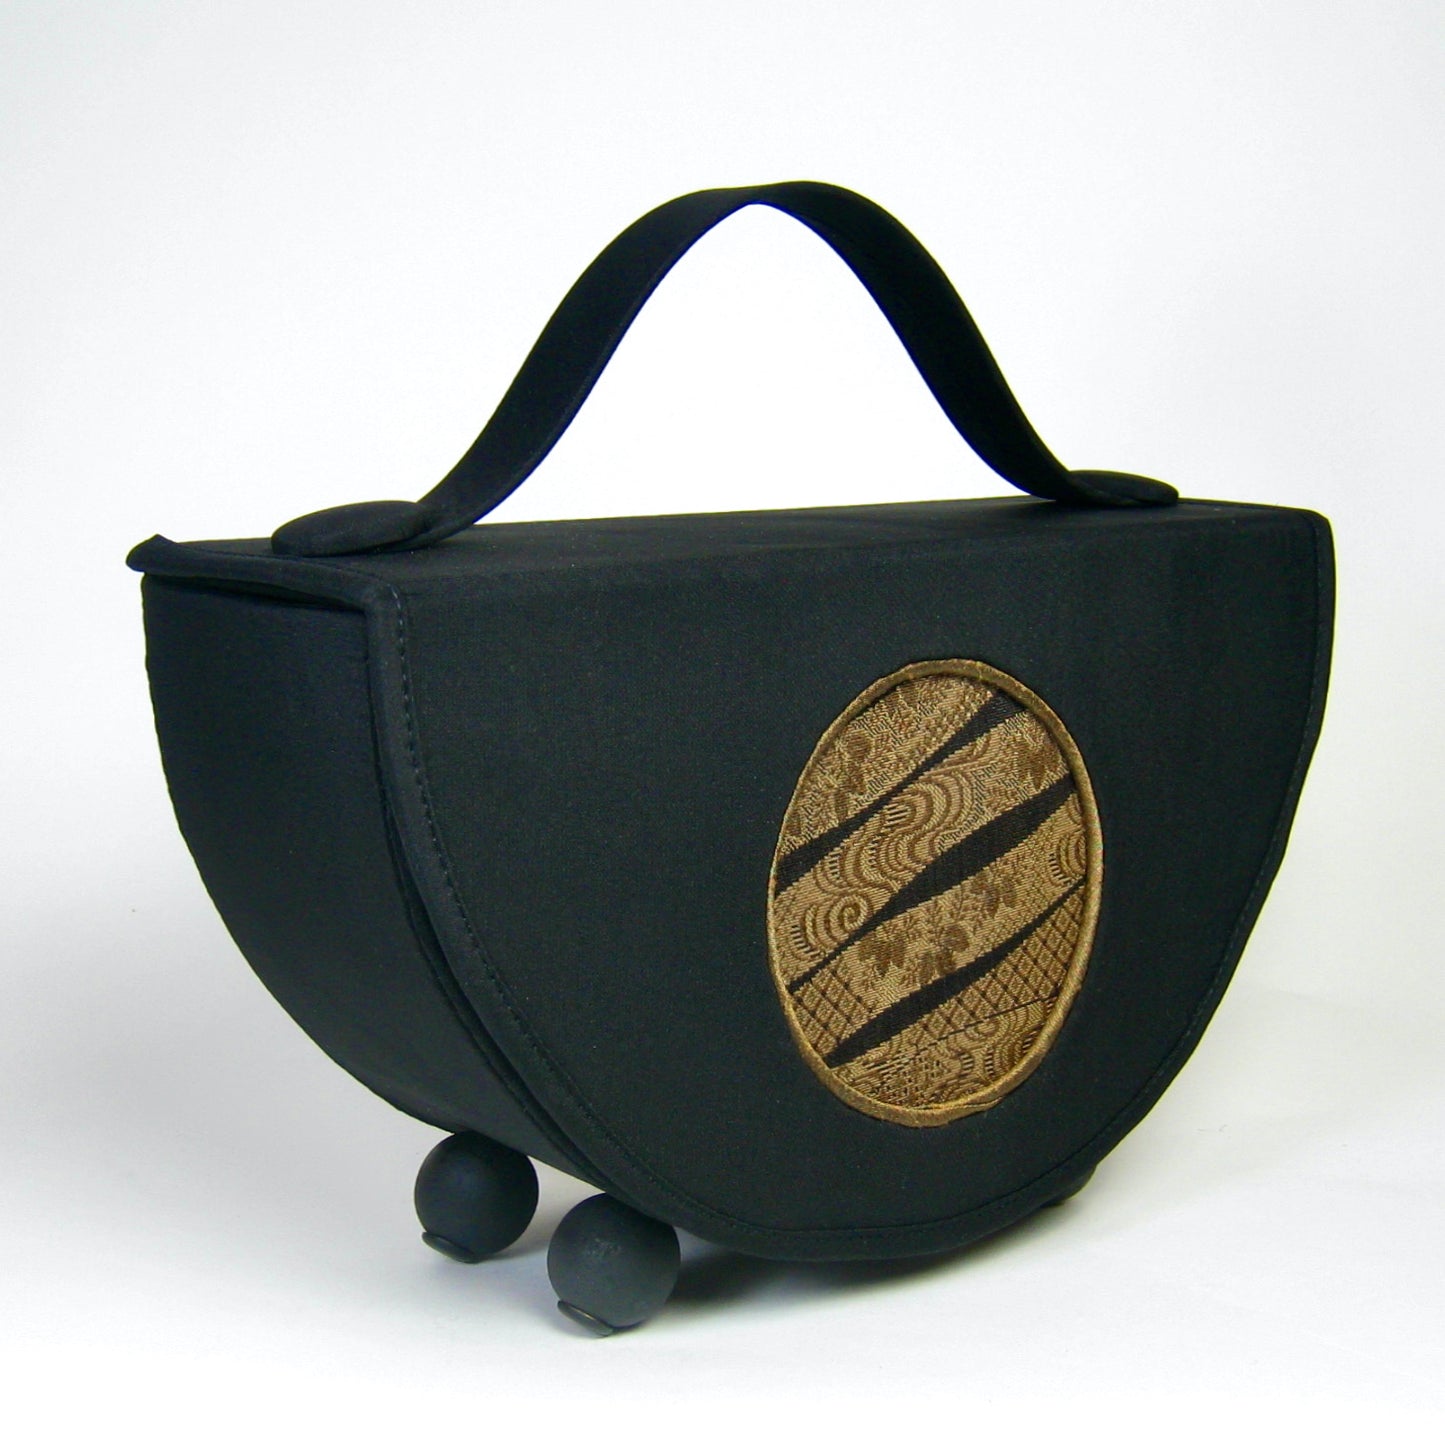 Moon Purse - Black with Gold